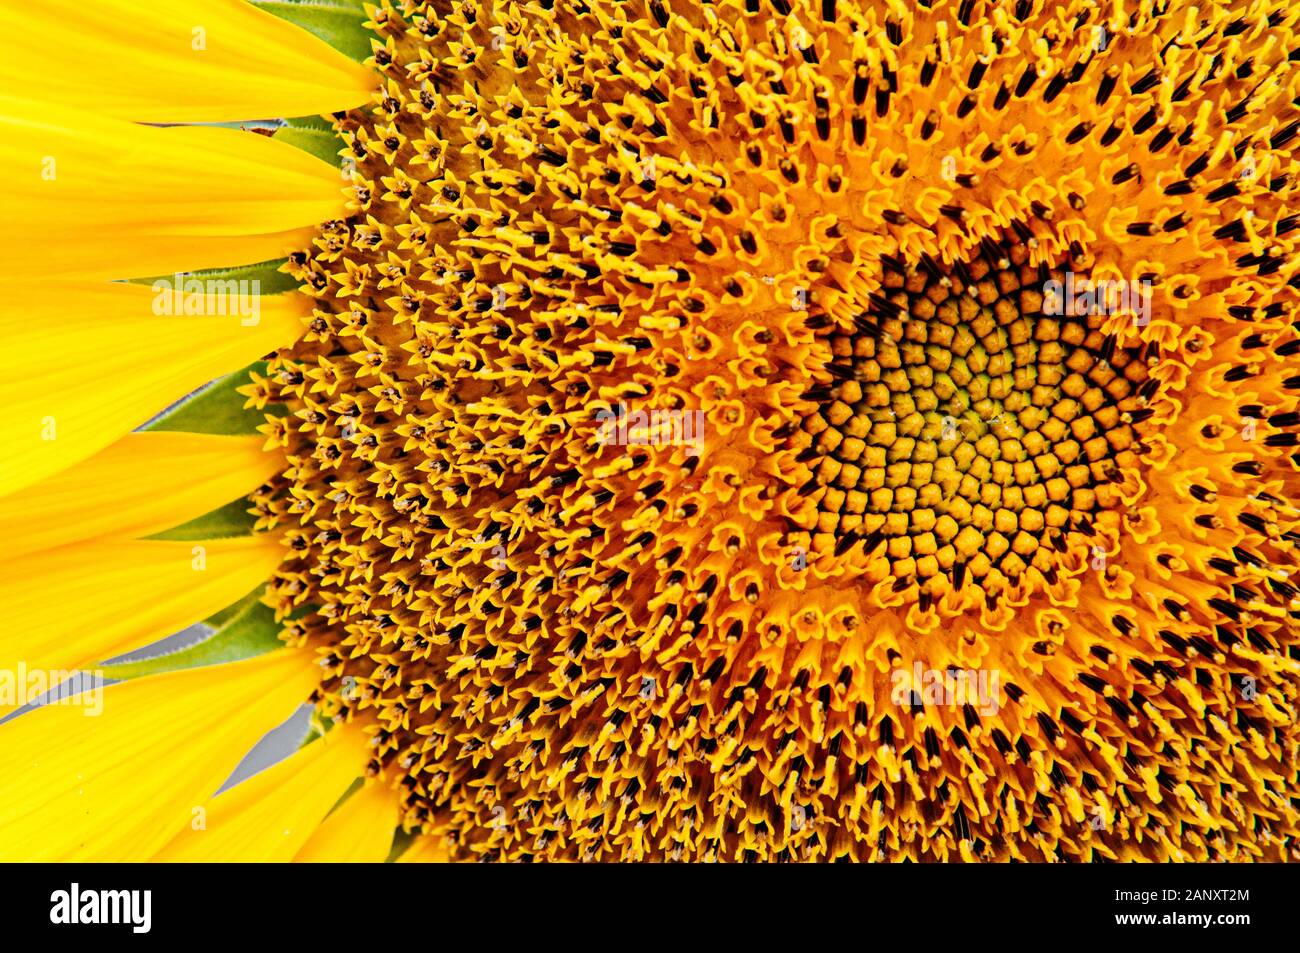 Macro close up details of golden yellow sunflower disk floret and ray floret petals. Nature plant background Stock Photo